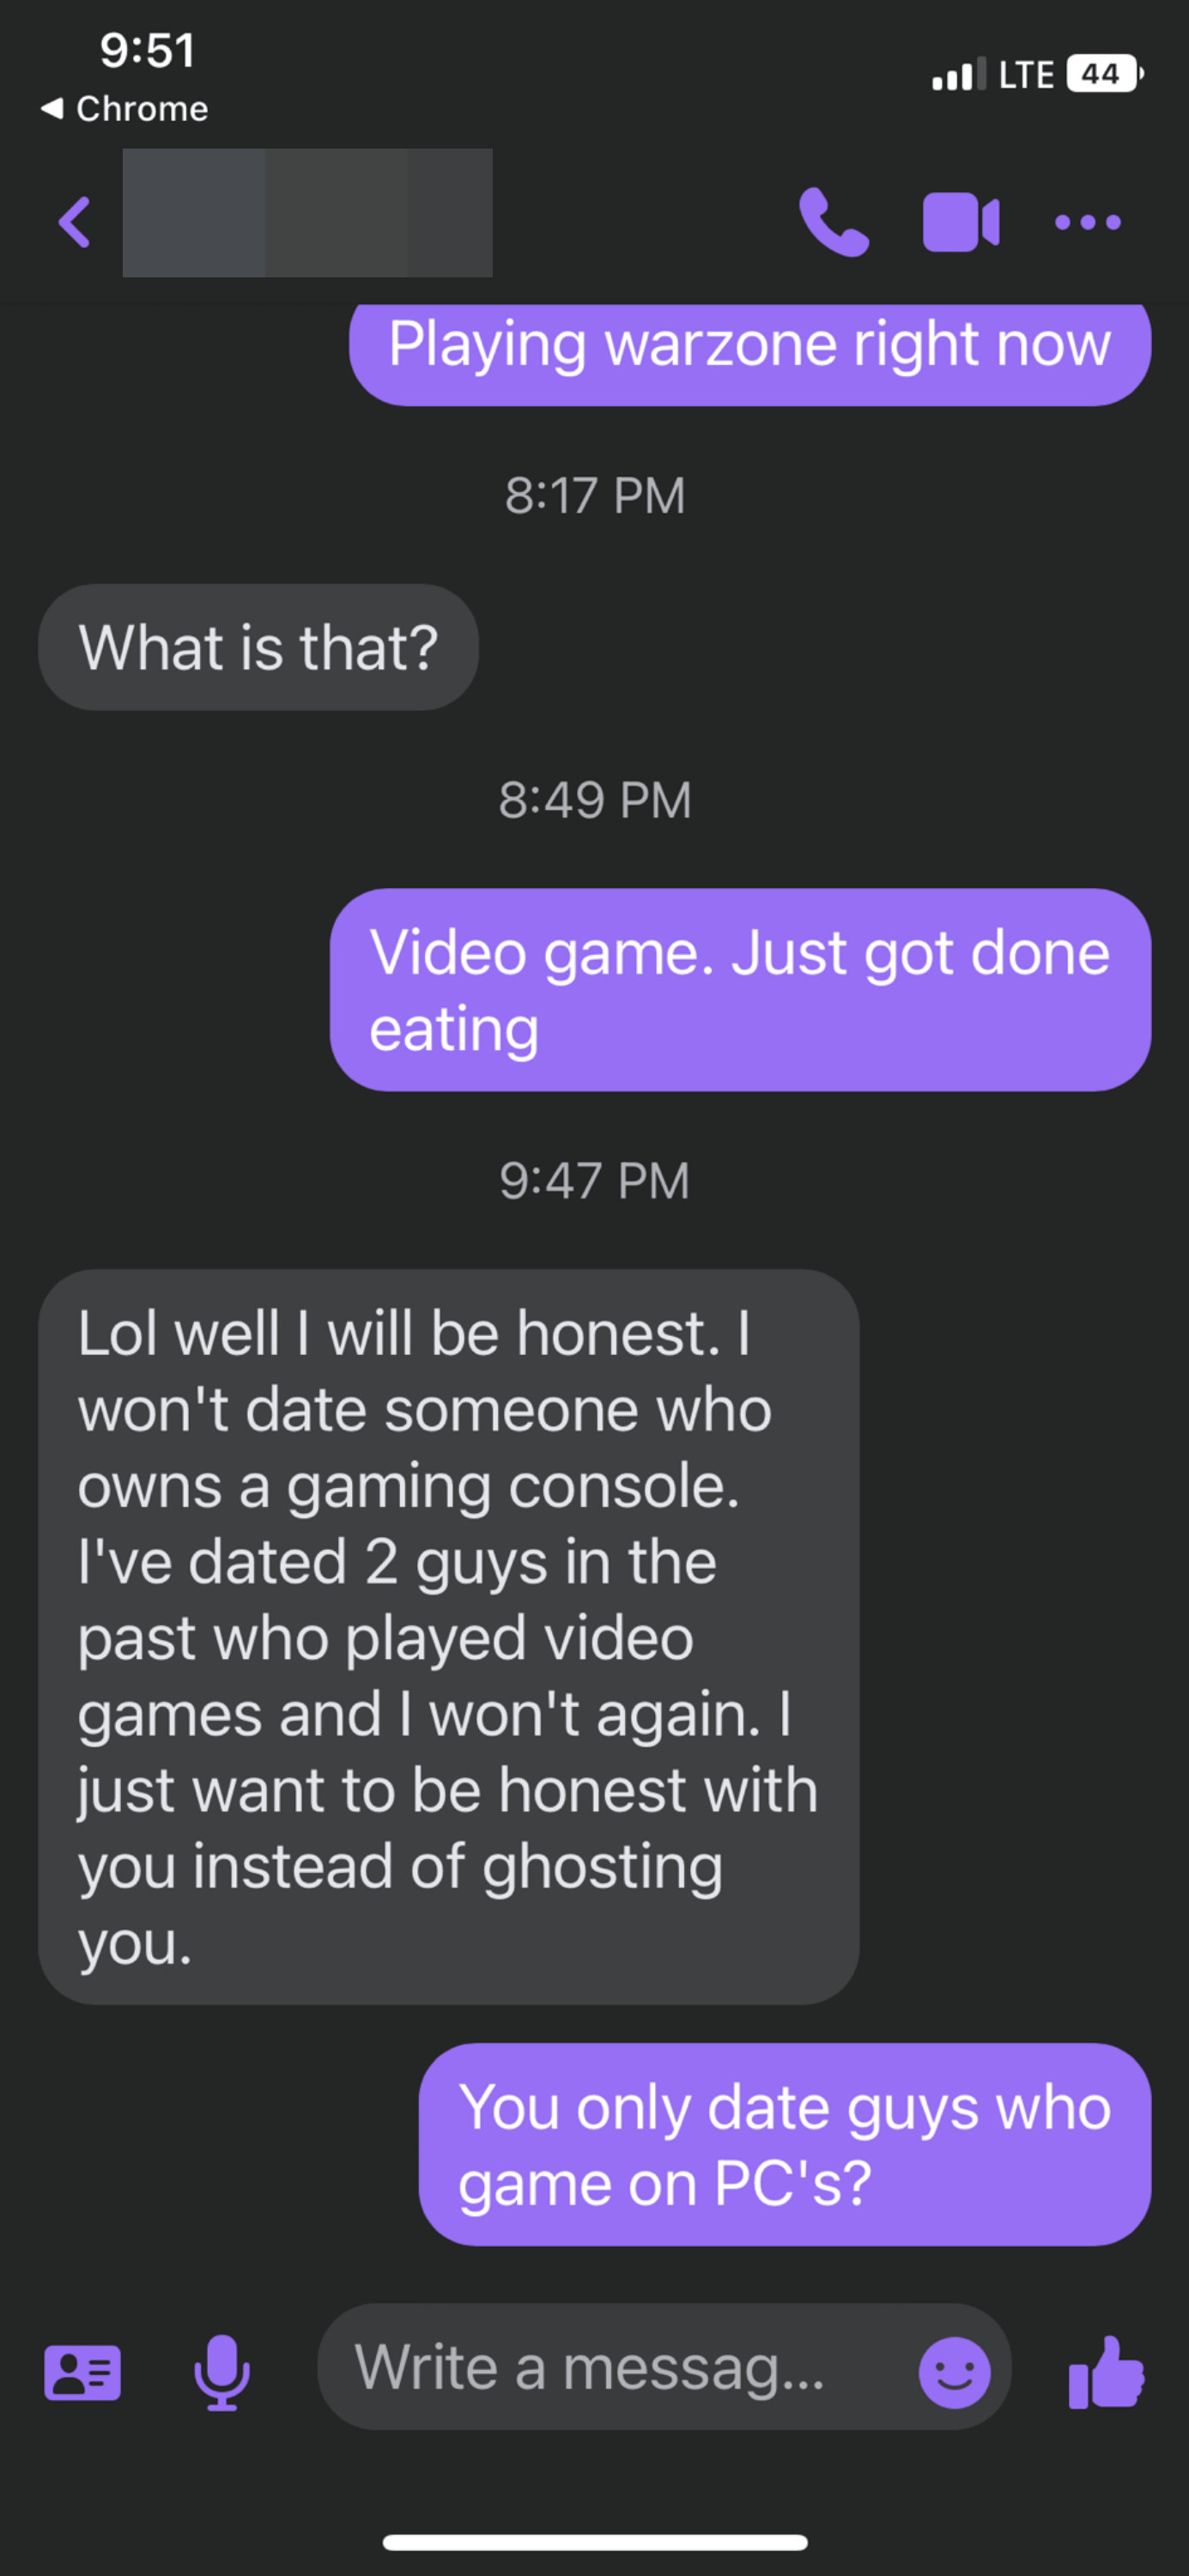 Person says they won’t date a gamer